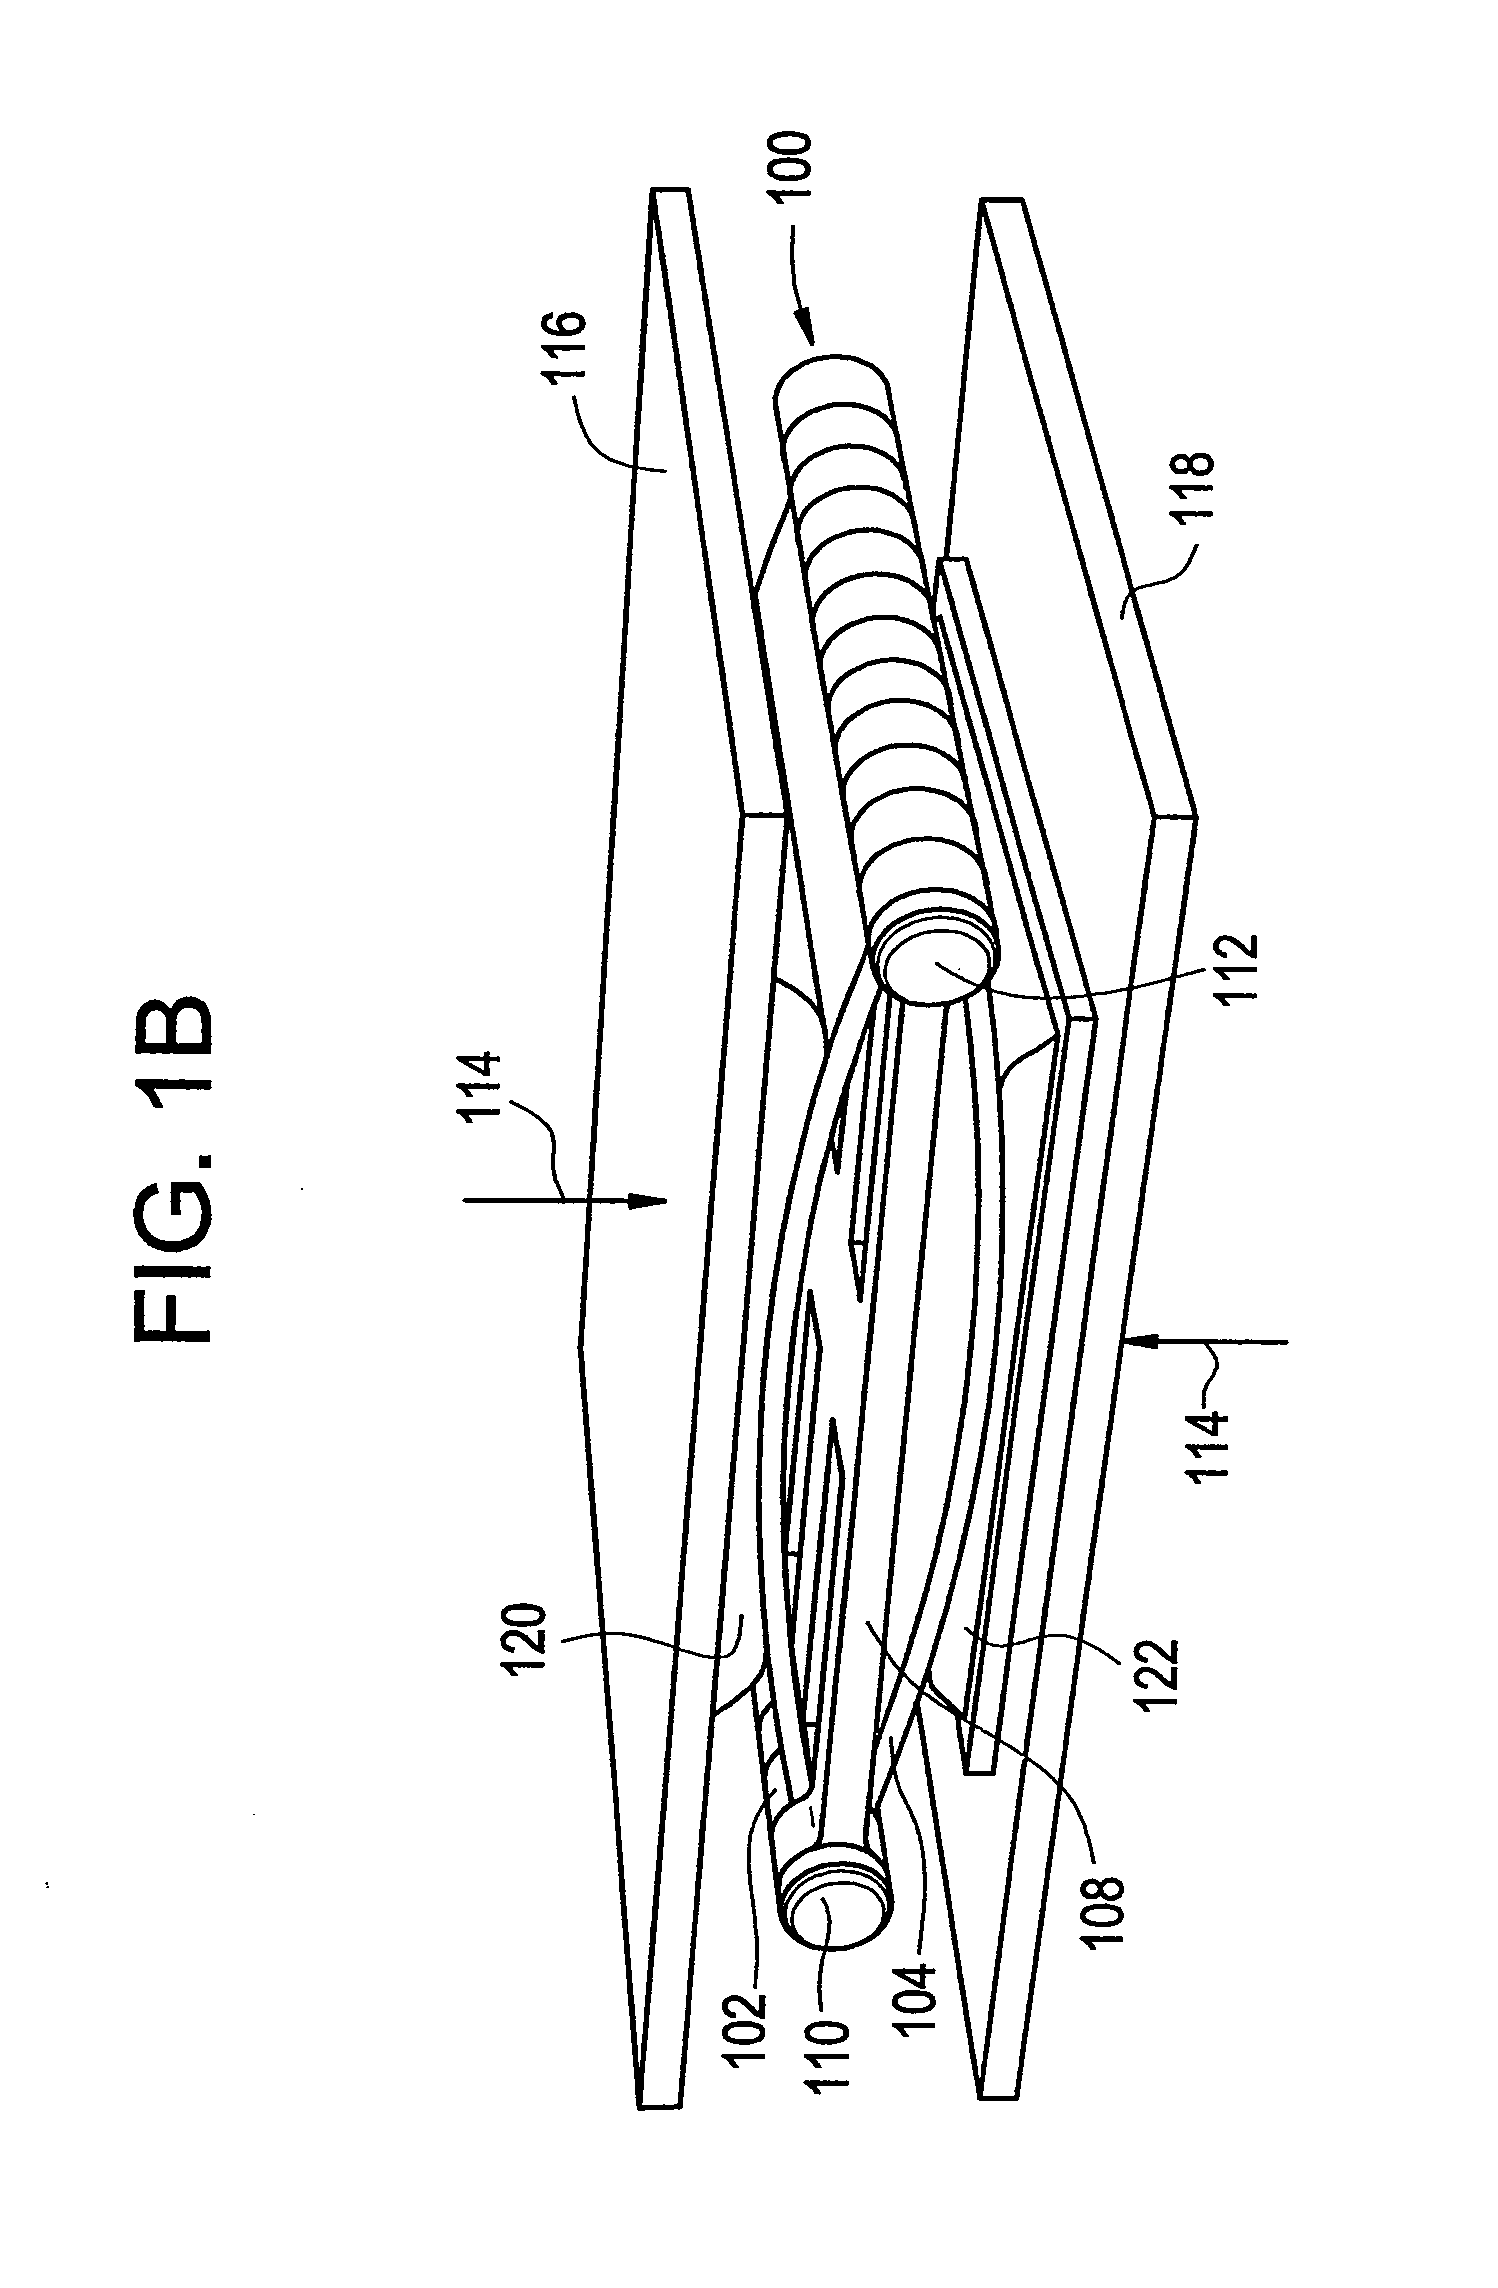 Impact Attenuating and Spring Elements and Products Containing such Elements